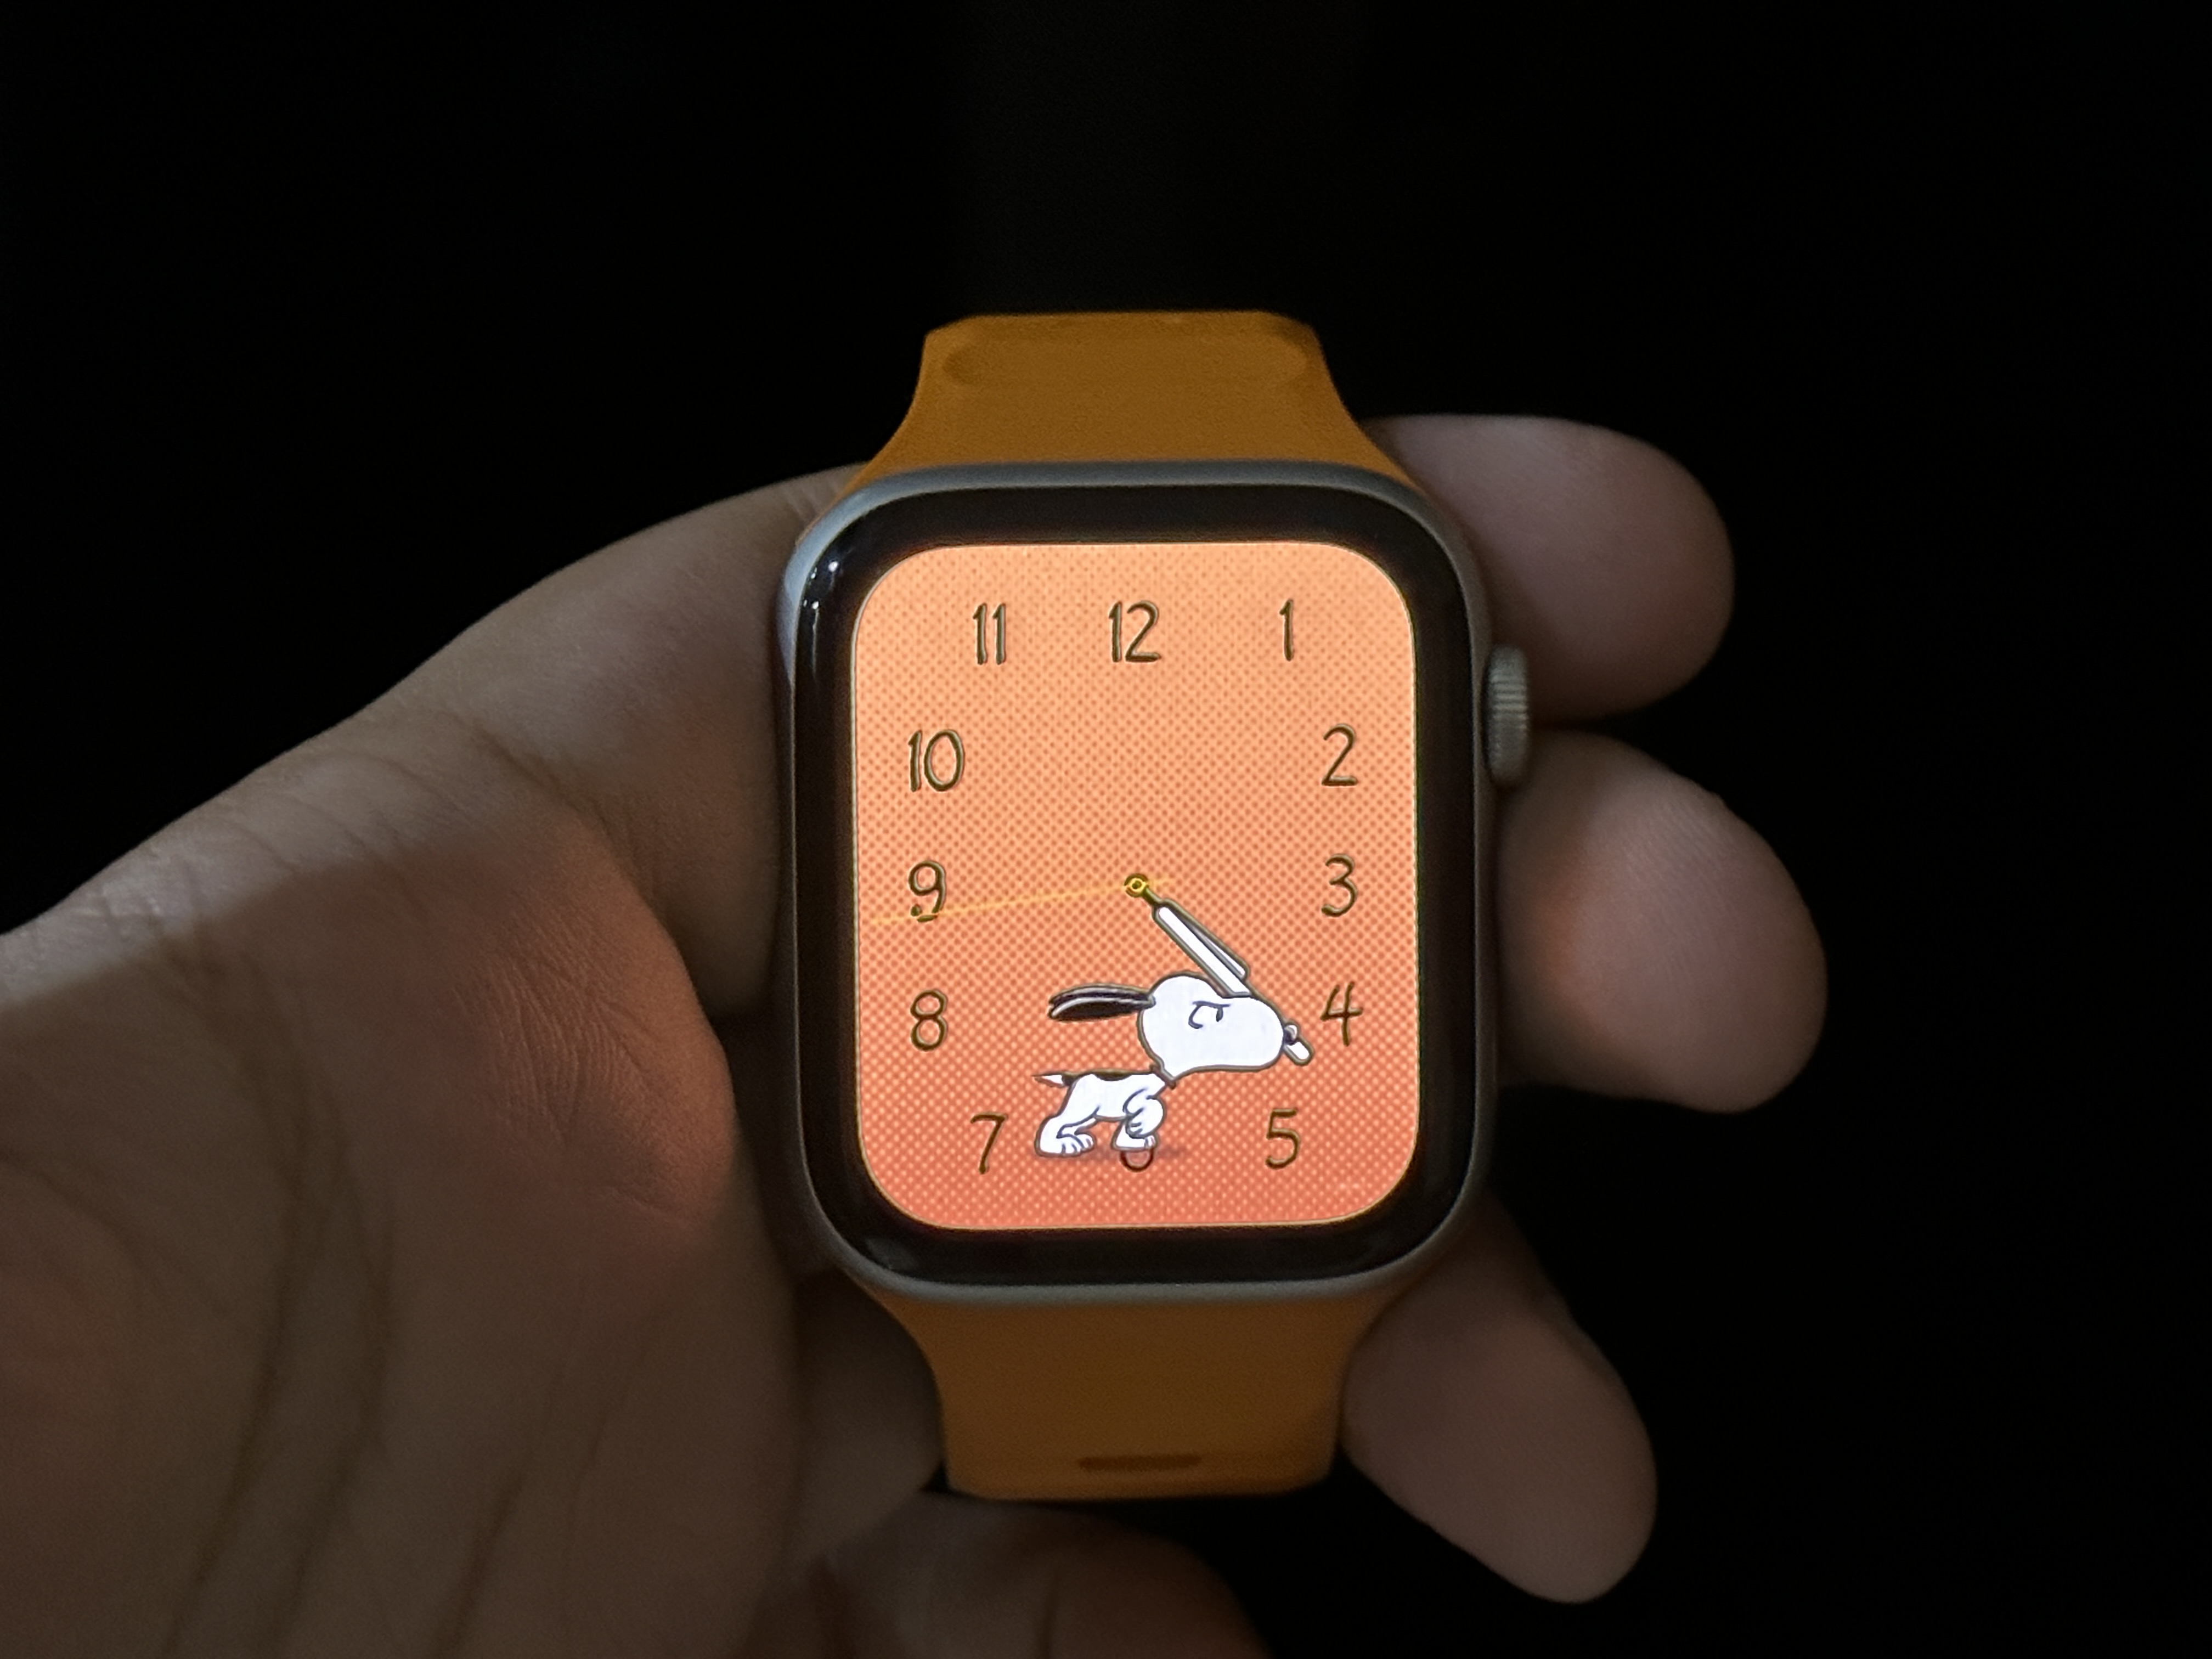 Snoopy Watch Face with Pumpkin background on Apple Watch SE.